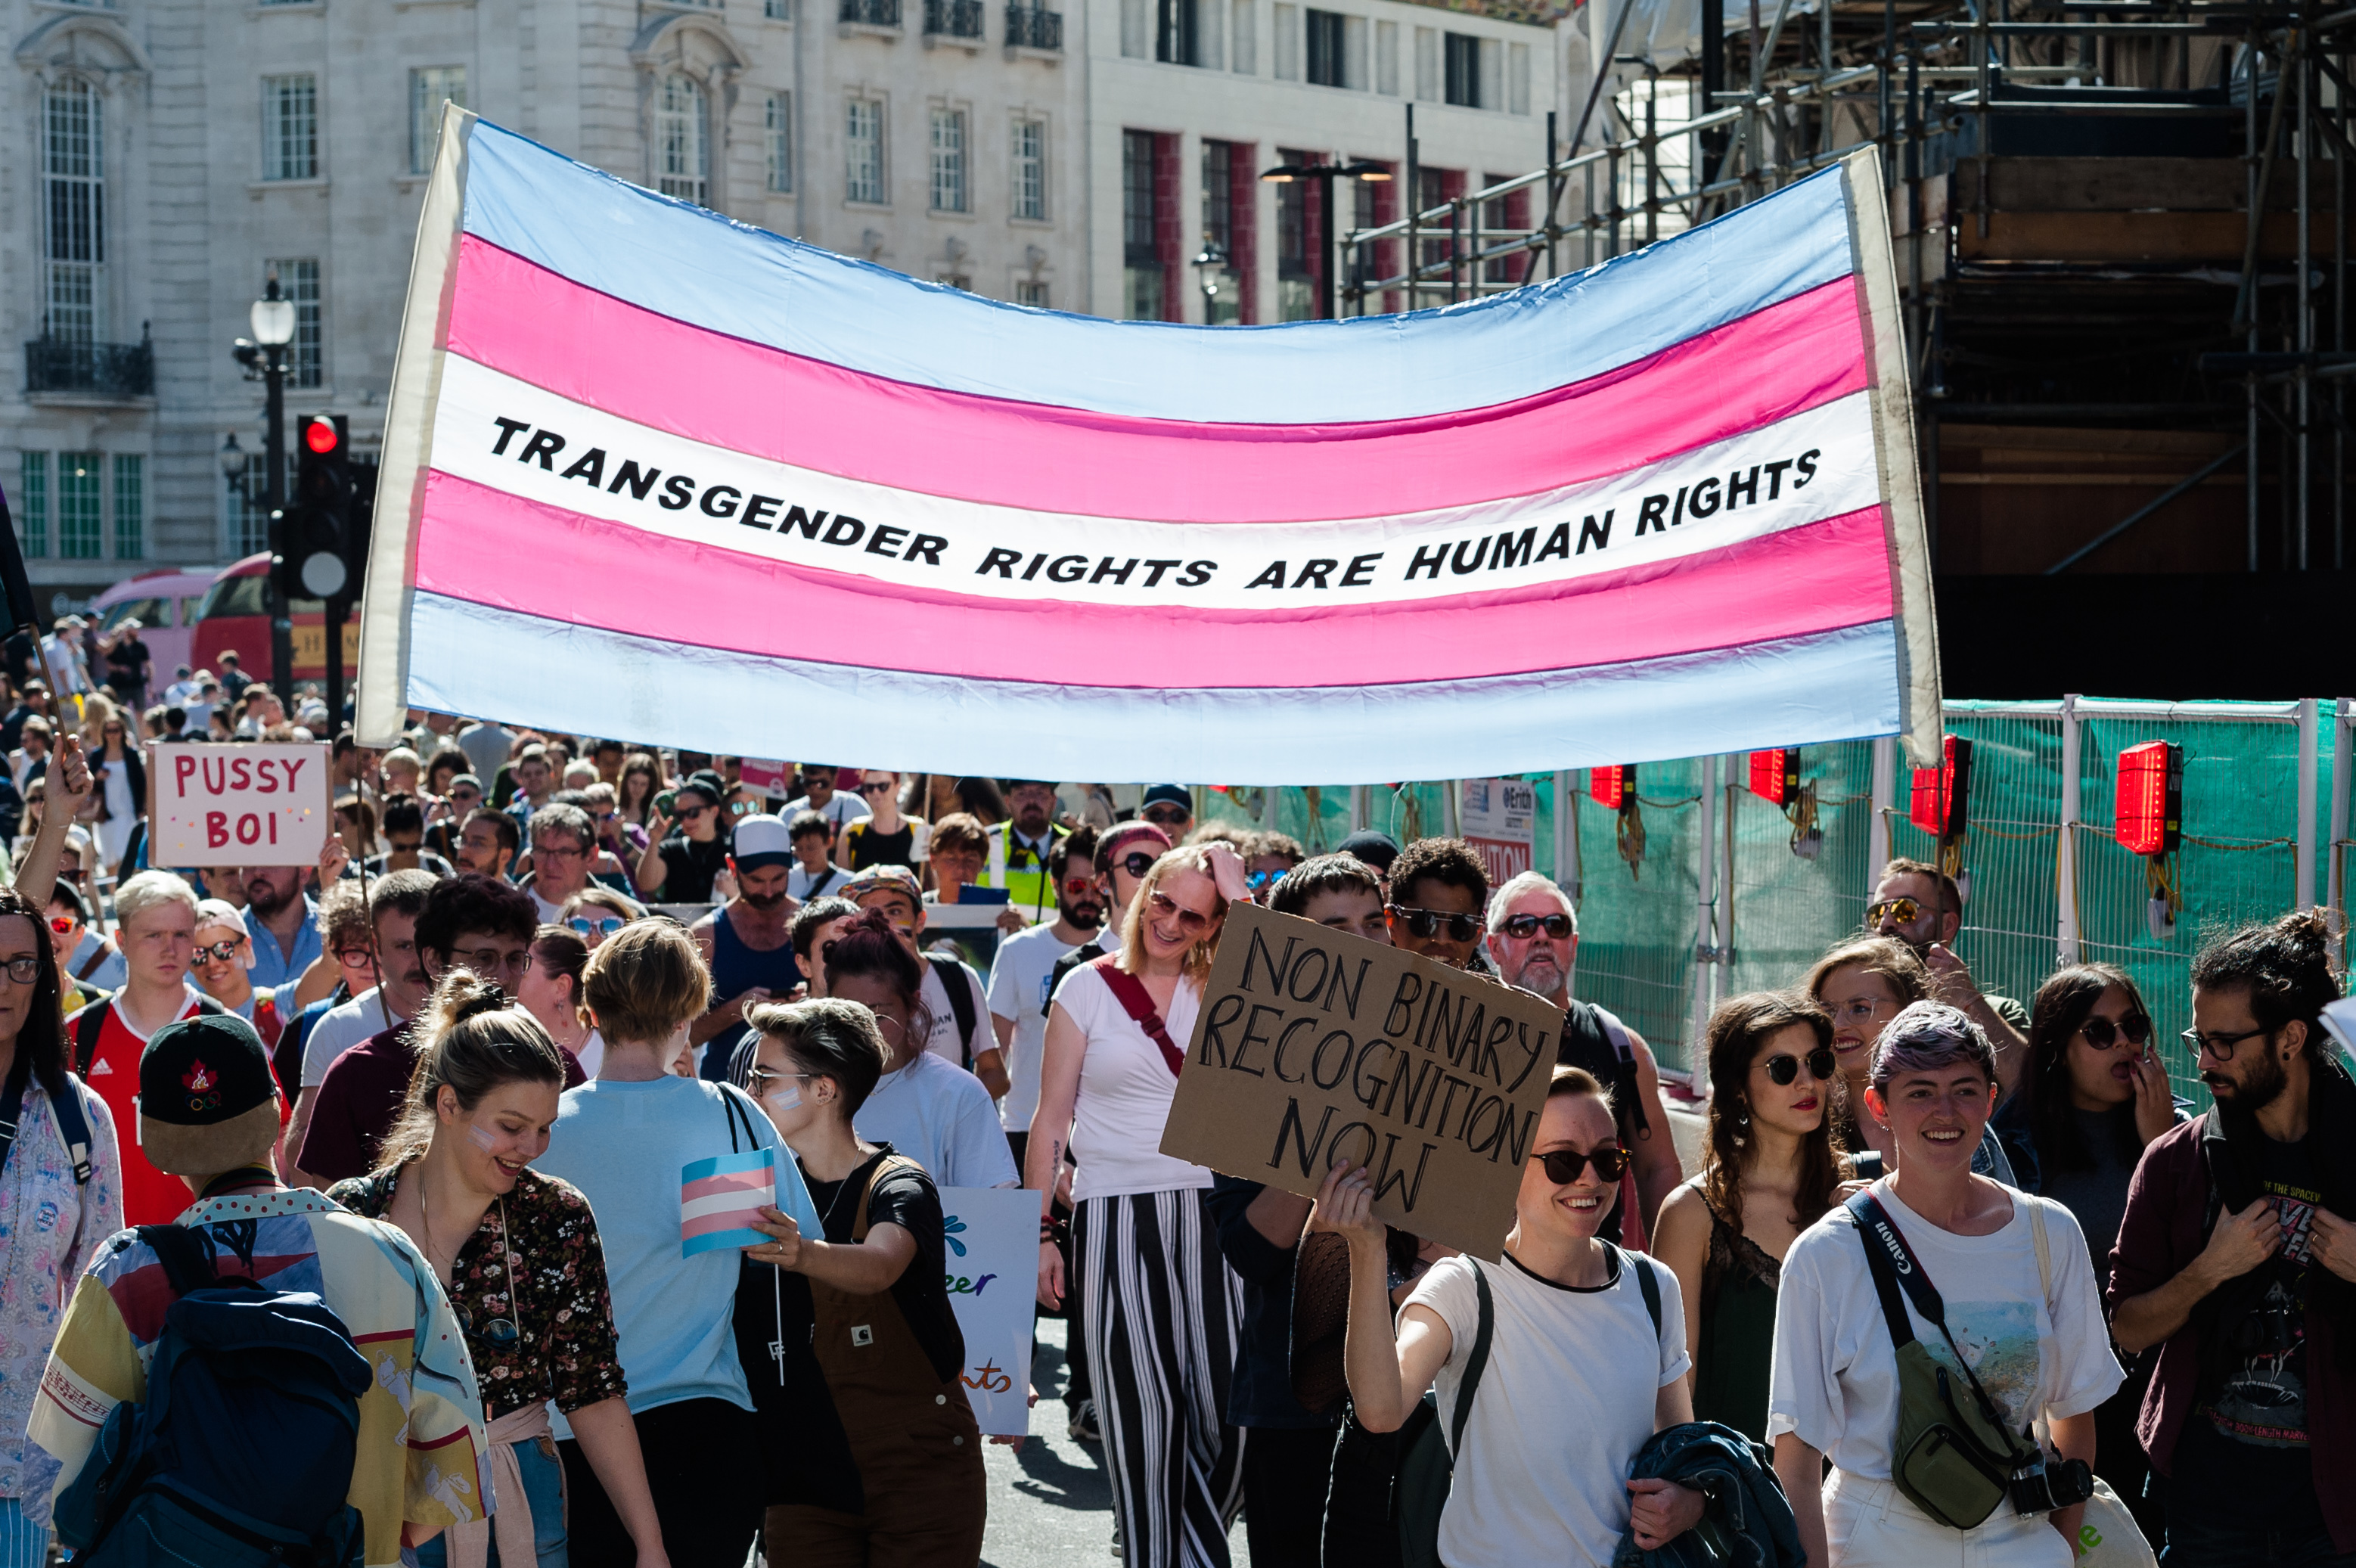 The transgender debate: Can we just live and let live?